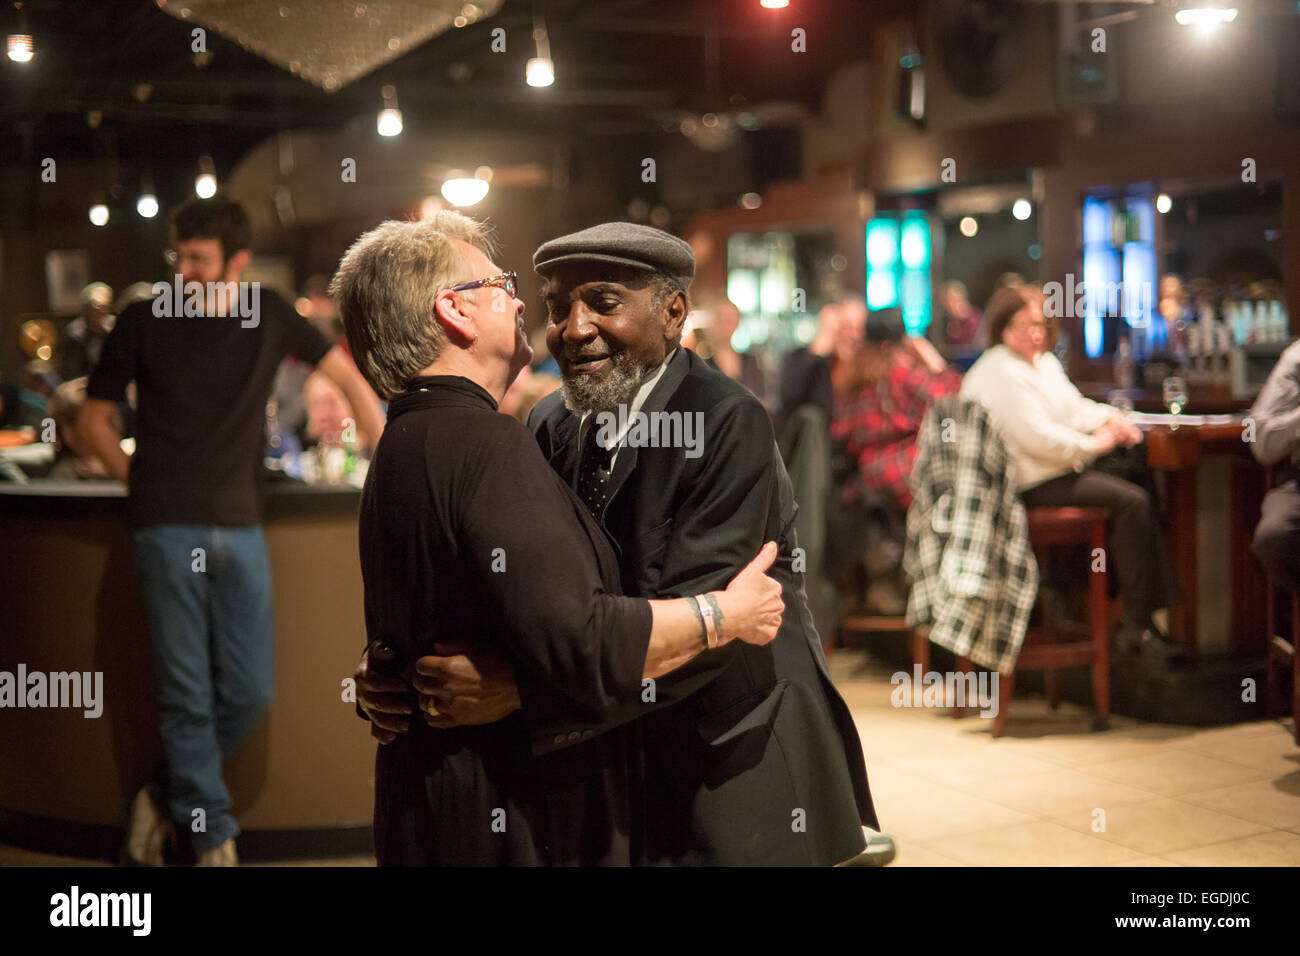 Detroit, Michigan - A benefit concert and party at Bert's Marketplace raises money to fight the eviction of a Motown musician. Stock Photo